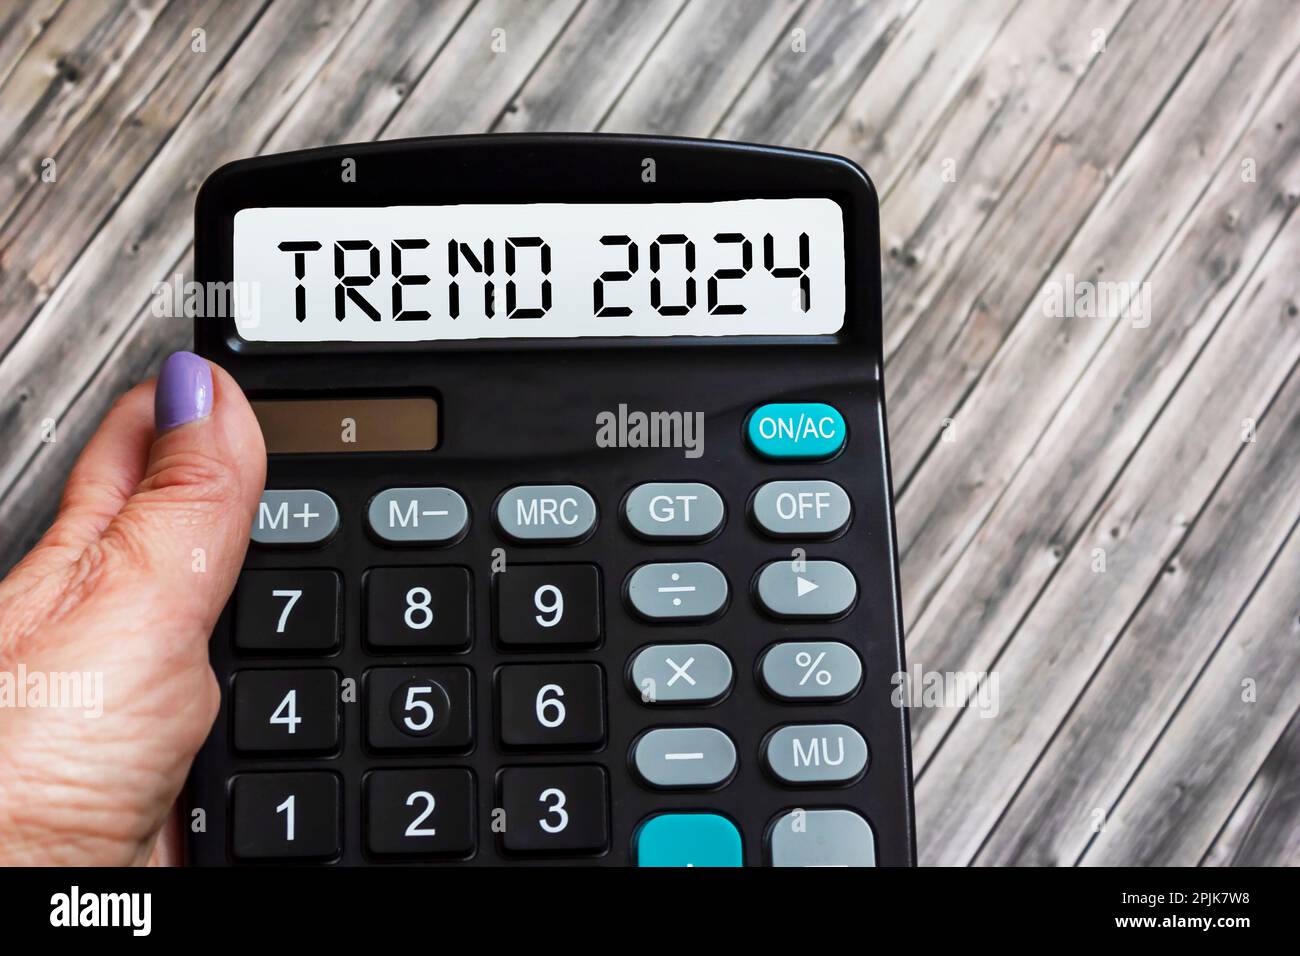 Trend 2024 text message on calculator display in female hand on wooden background Stock Photo